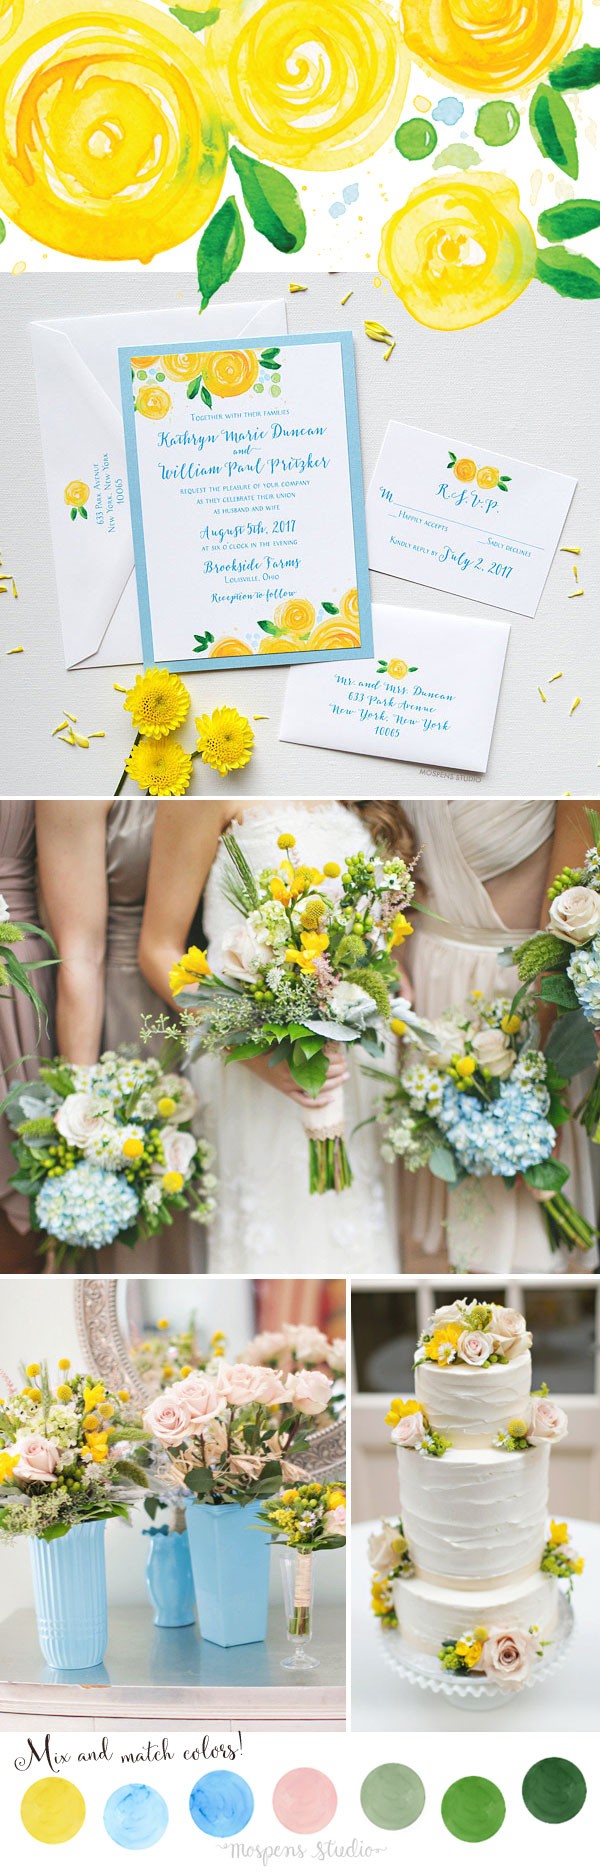 Modern Spring Wedding Ideas! Michelle Mospens original Yellow Rose Blooms hand-painted art in watercolor. Each design is then printed stroke for stroke for a LOVELY hand-painted effect. www.mospensstudio.com